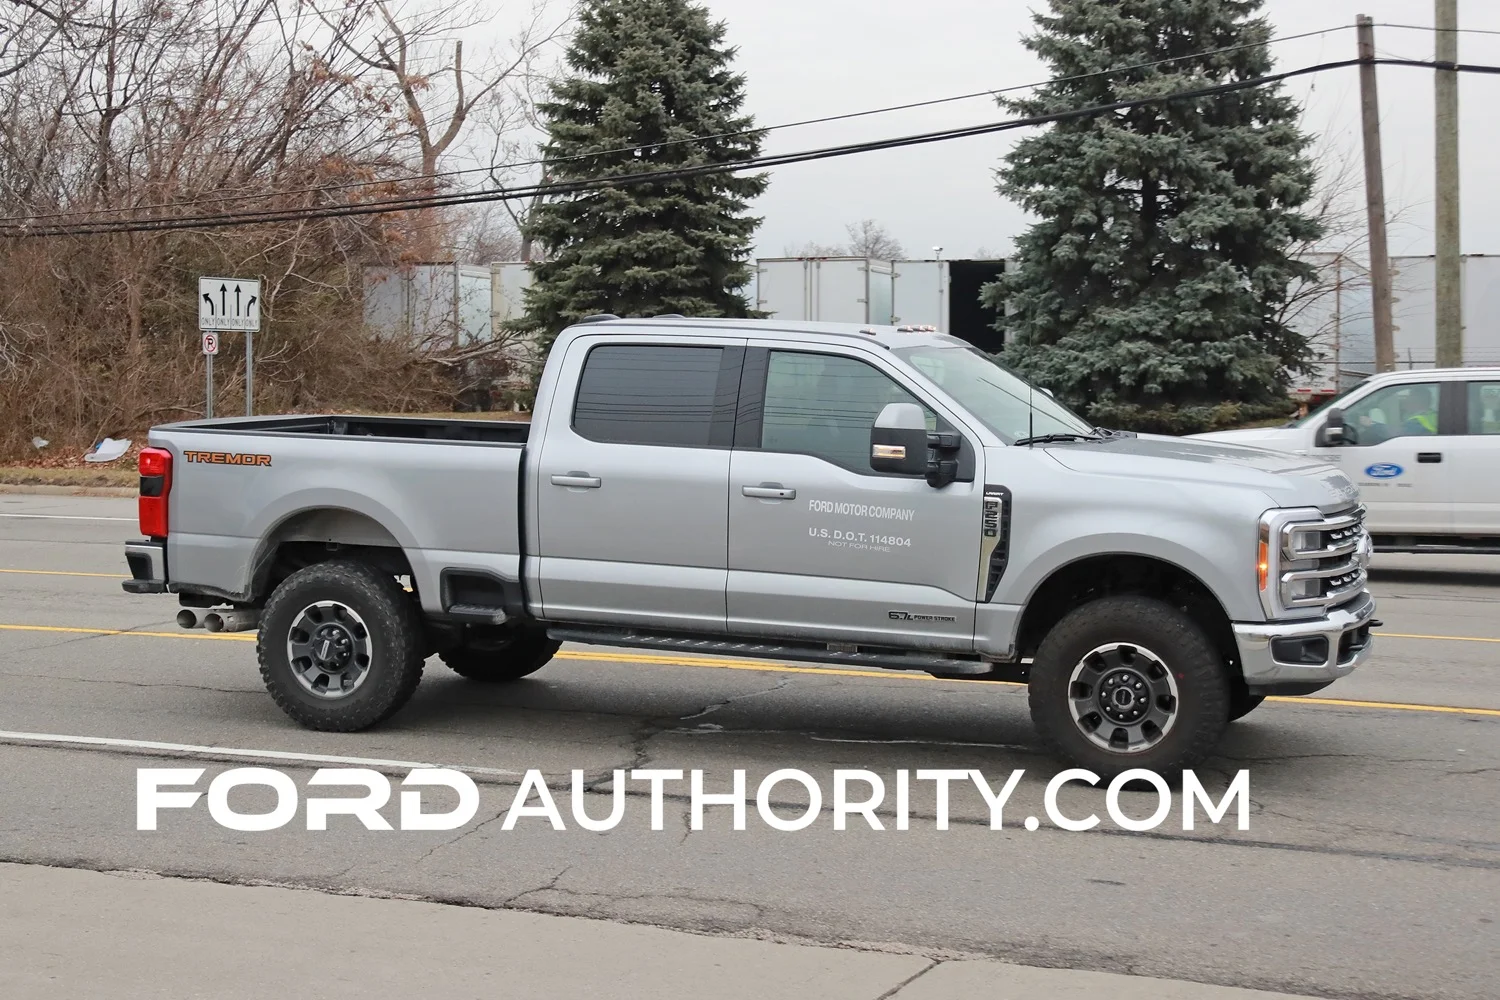 2023-Ford-F-250-Super-Duty-Crew-Cab-6-Foot-Long-Bed-Lariat-Tremor-Package-Iconic-Silver-Metallic-JS-Real-World-Photos-Exterior-003.jpg